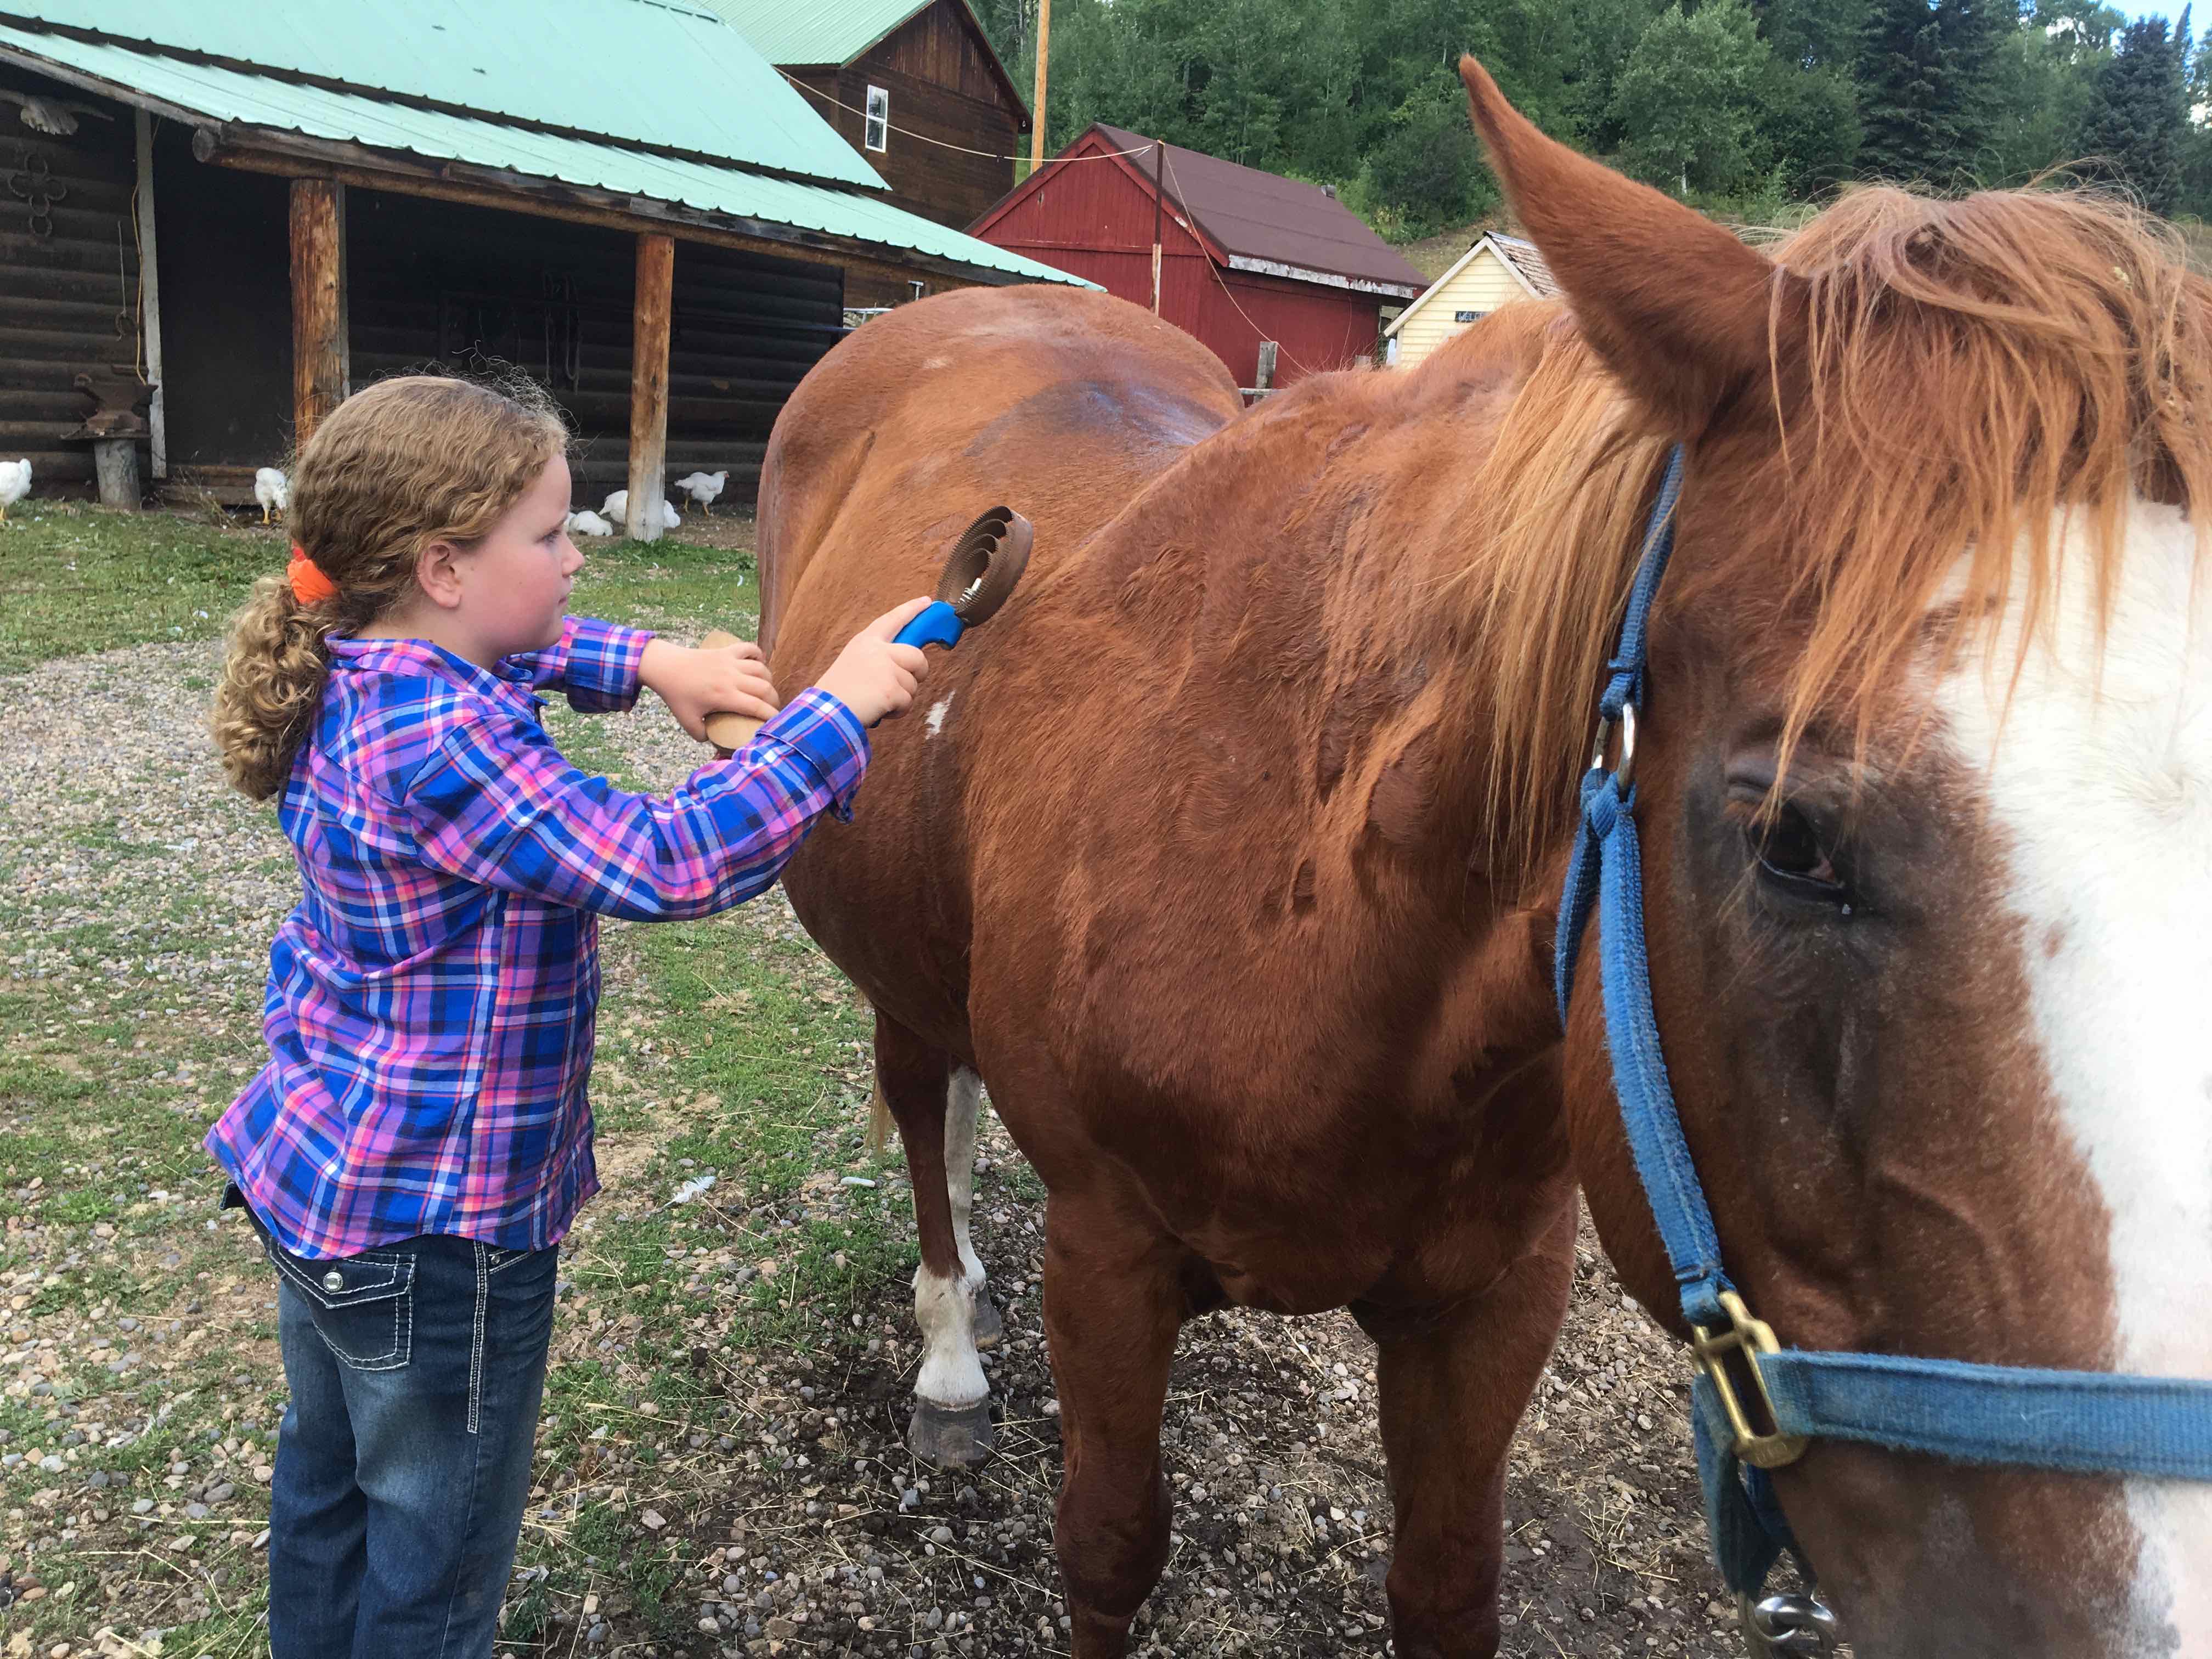 Bring your horse to Ute Lodge